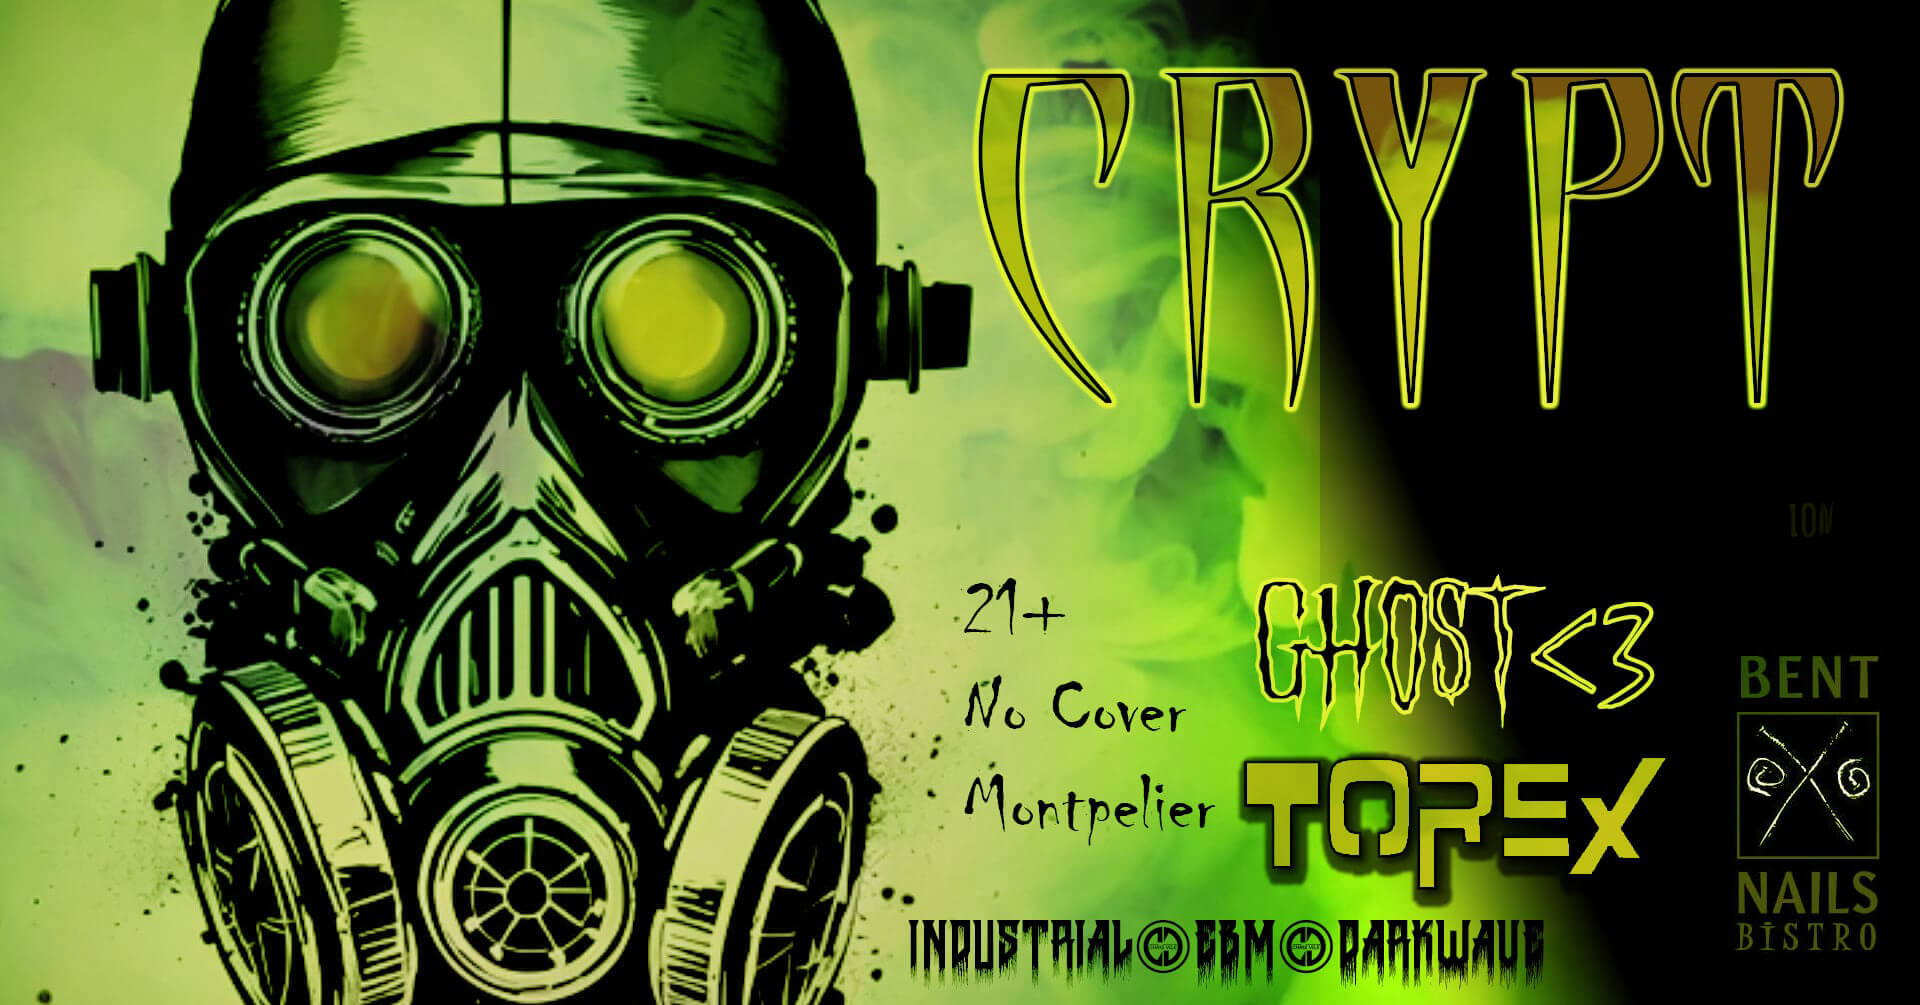 Crypt Industrial/Goth DJ poster